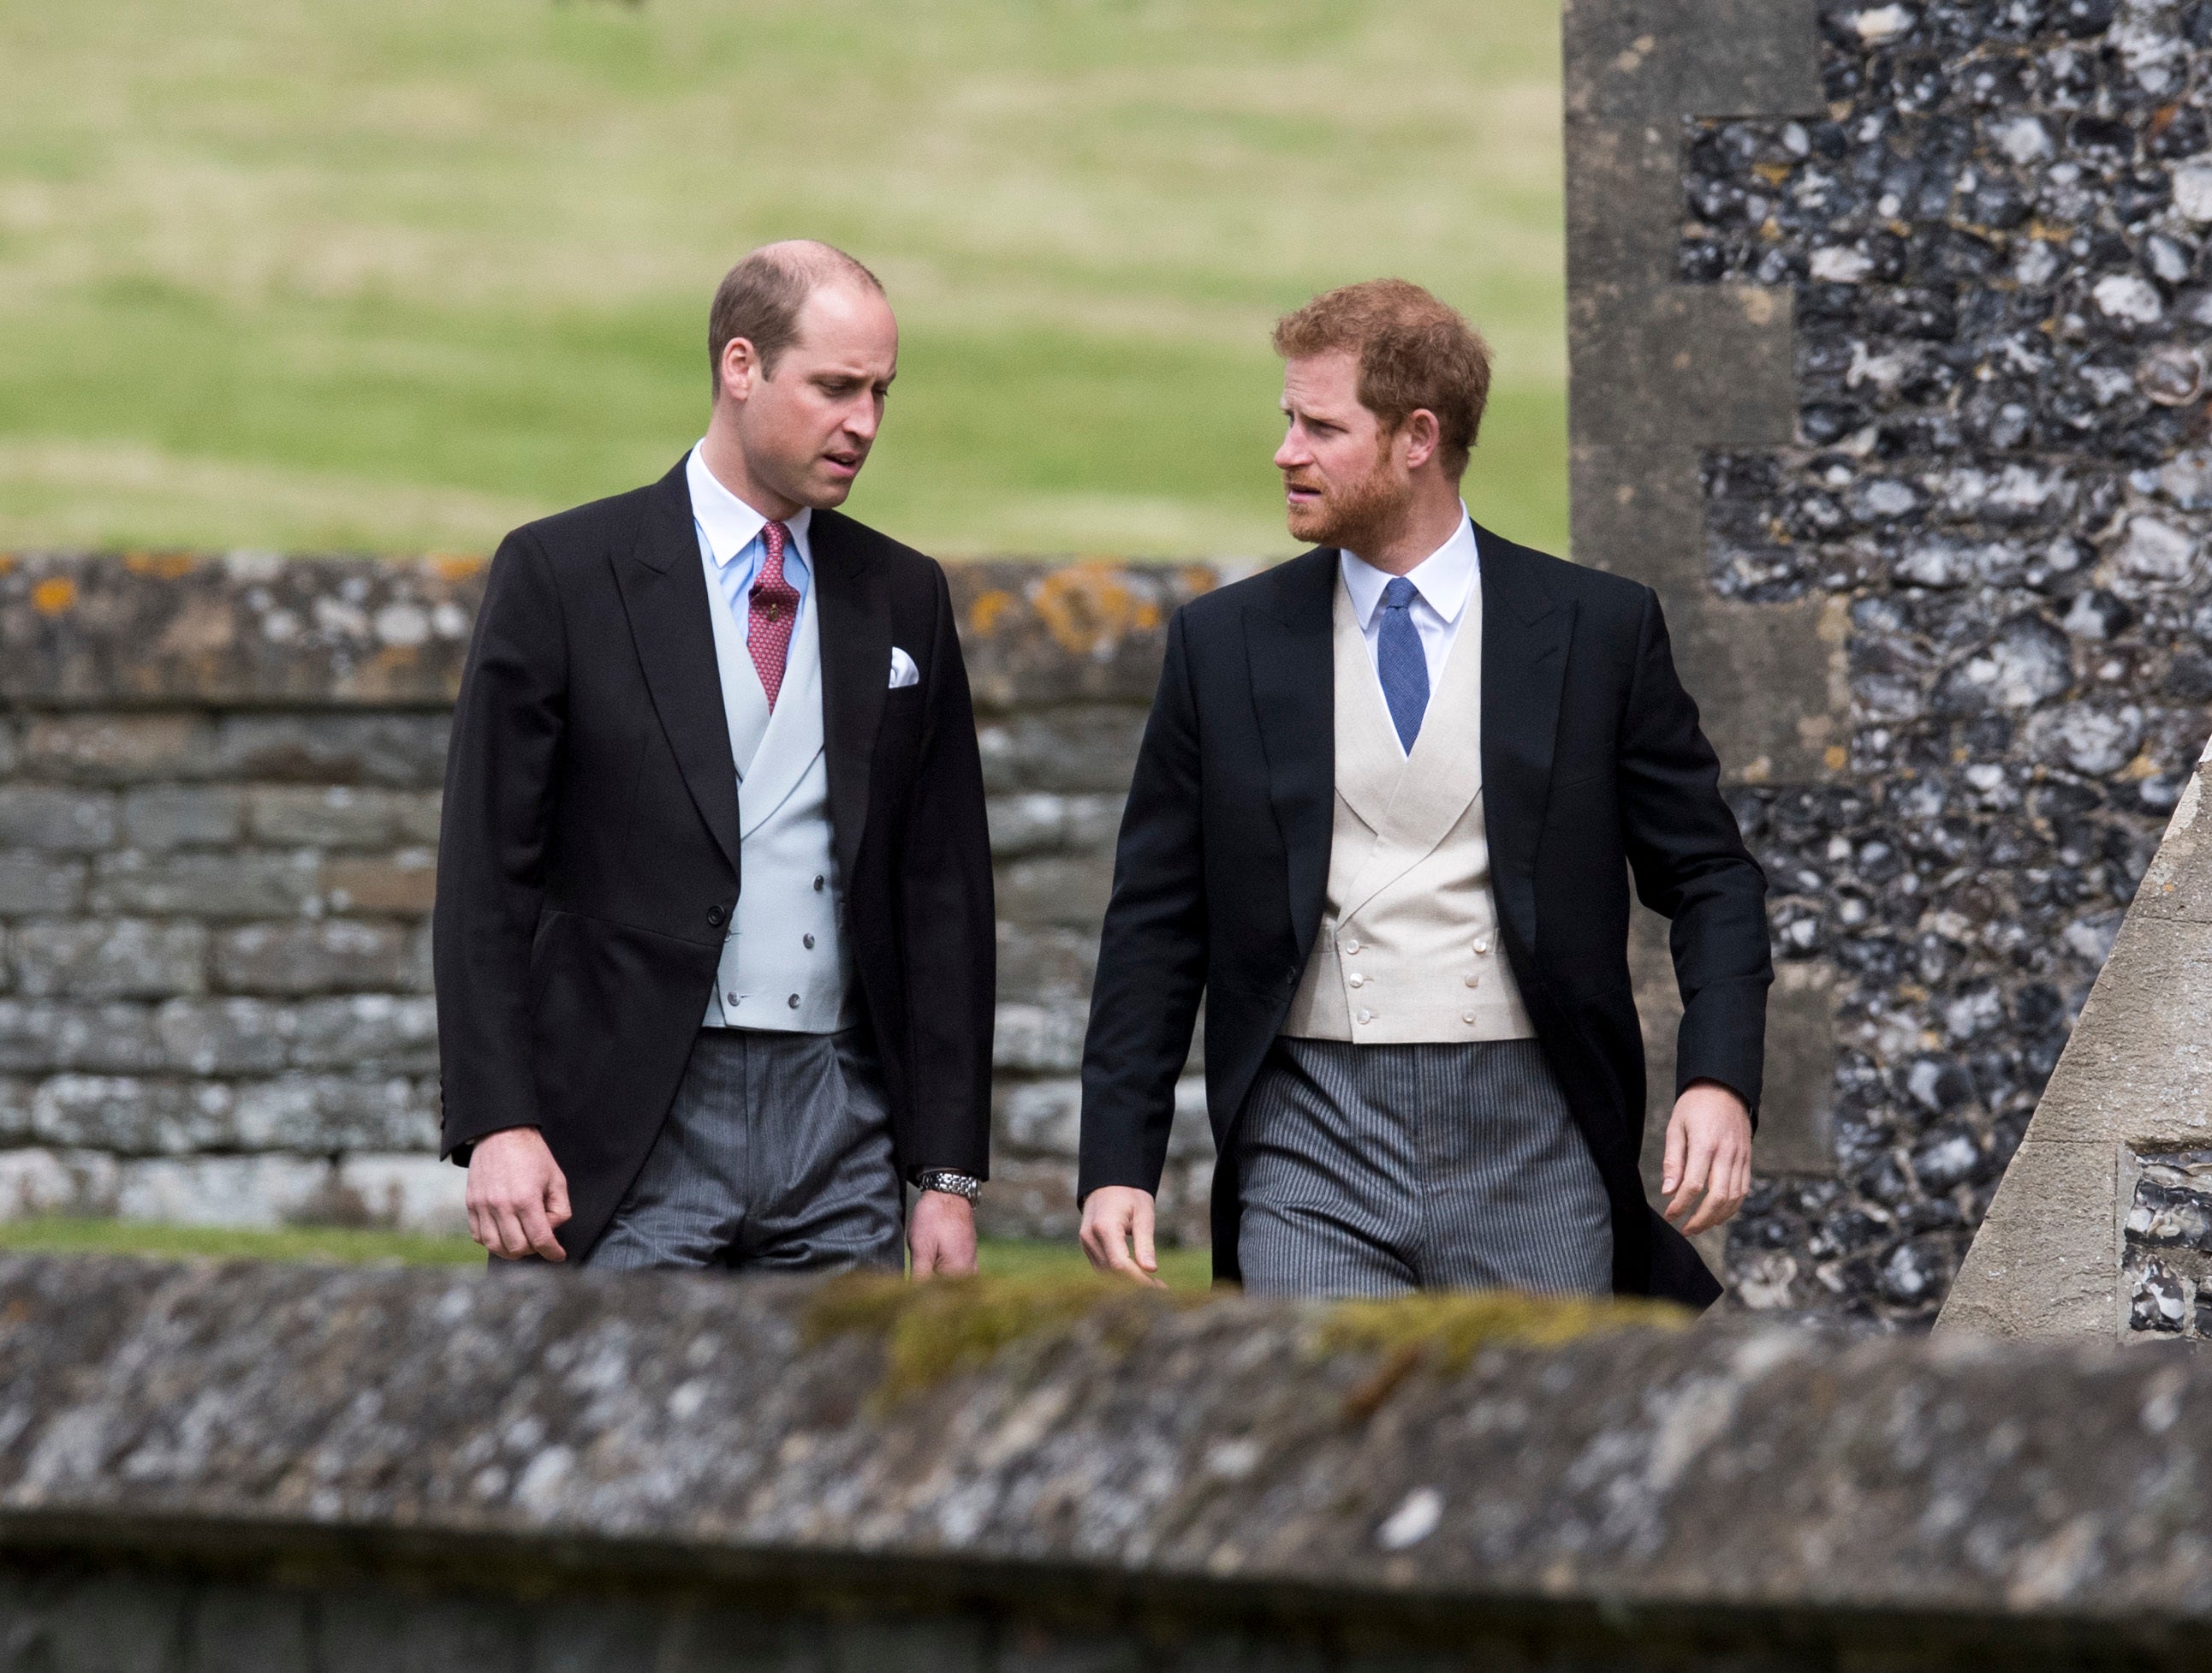 The relationship between the two brothers has been strained since Harry ditched his royal duties